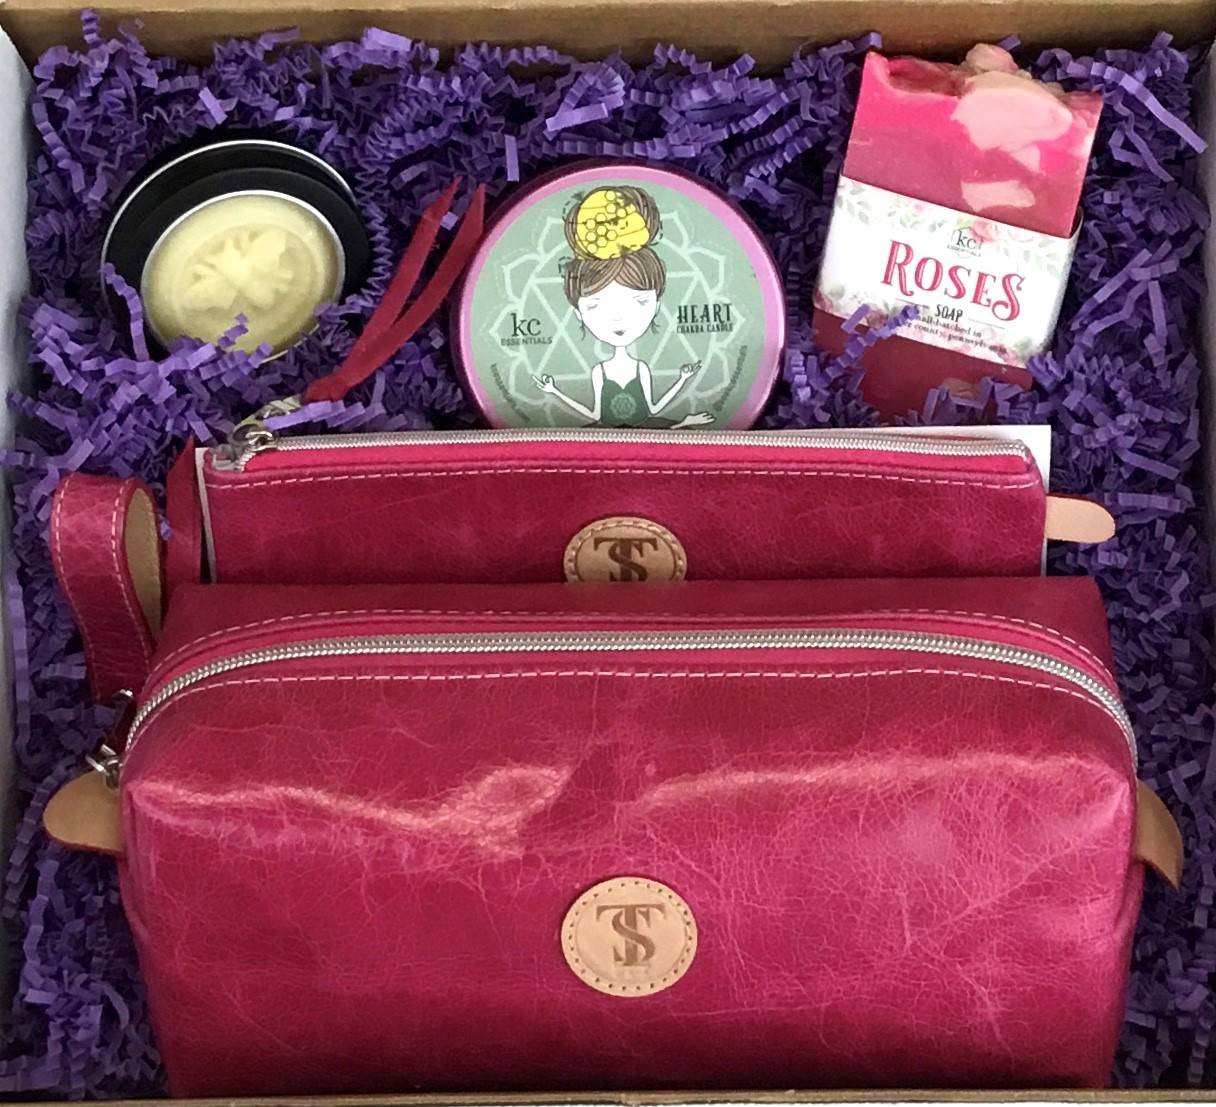 Town &amp; Shore Handcrafted Serenity Gift set featuring T5 Leather bath kit and brush bag shown in dark pink calfskin leather. KC Essentials artisan made vegan bar soap, scented soy chakra candle in a pink metal tin with a lady in a seated yoga pose on lid, and natural solid lotion bar in metal tin. Arranged in gift box with sustainable eco-friendly purple crinkle paper.